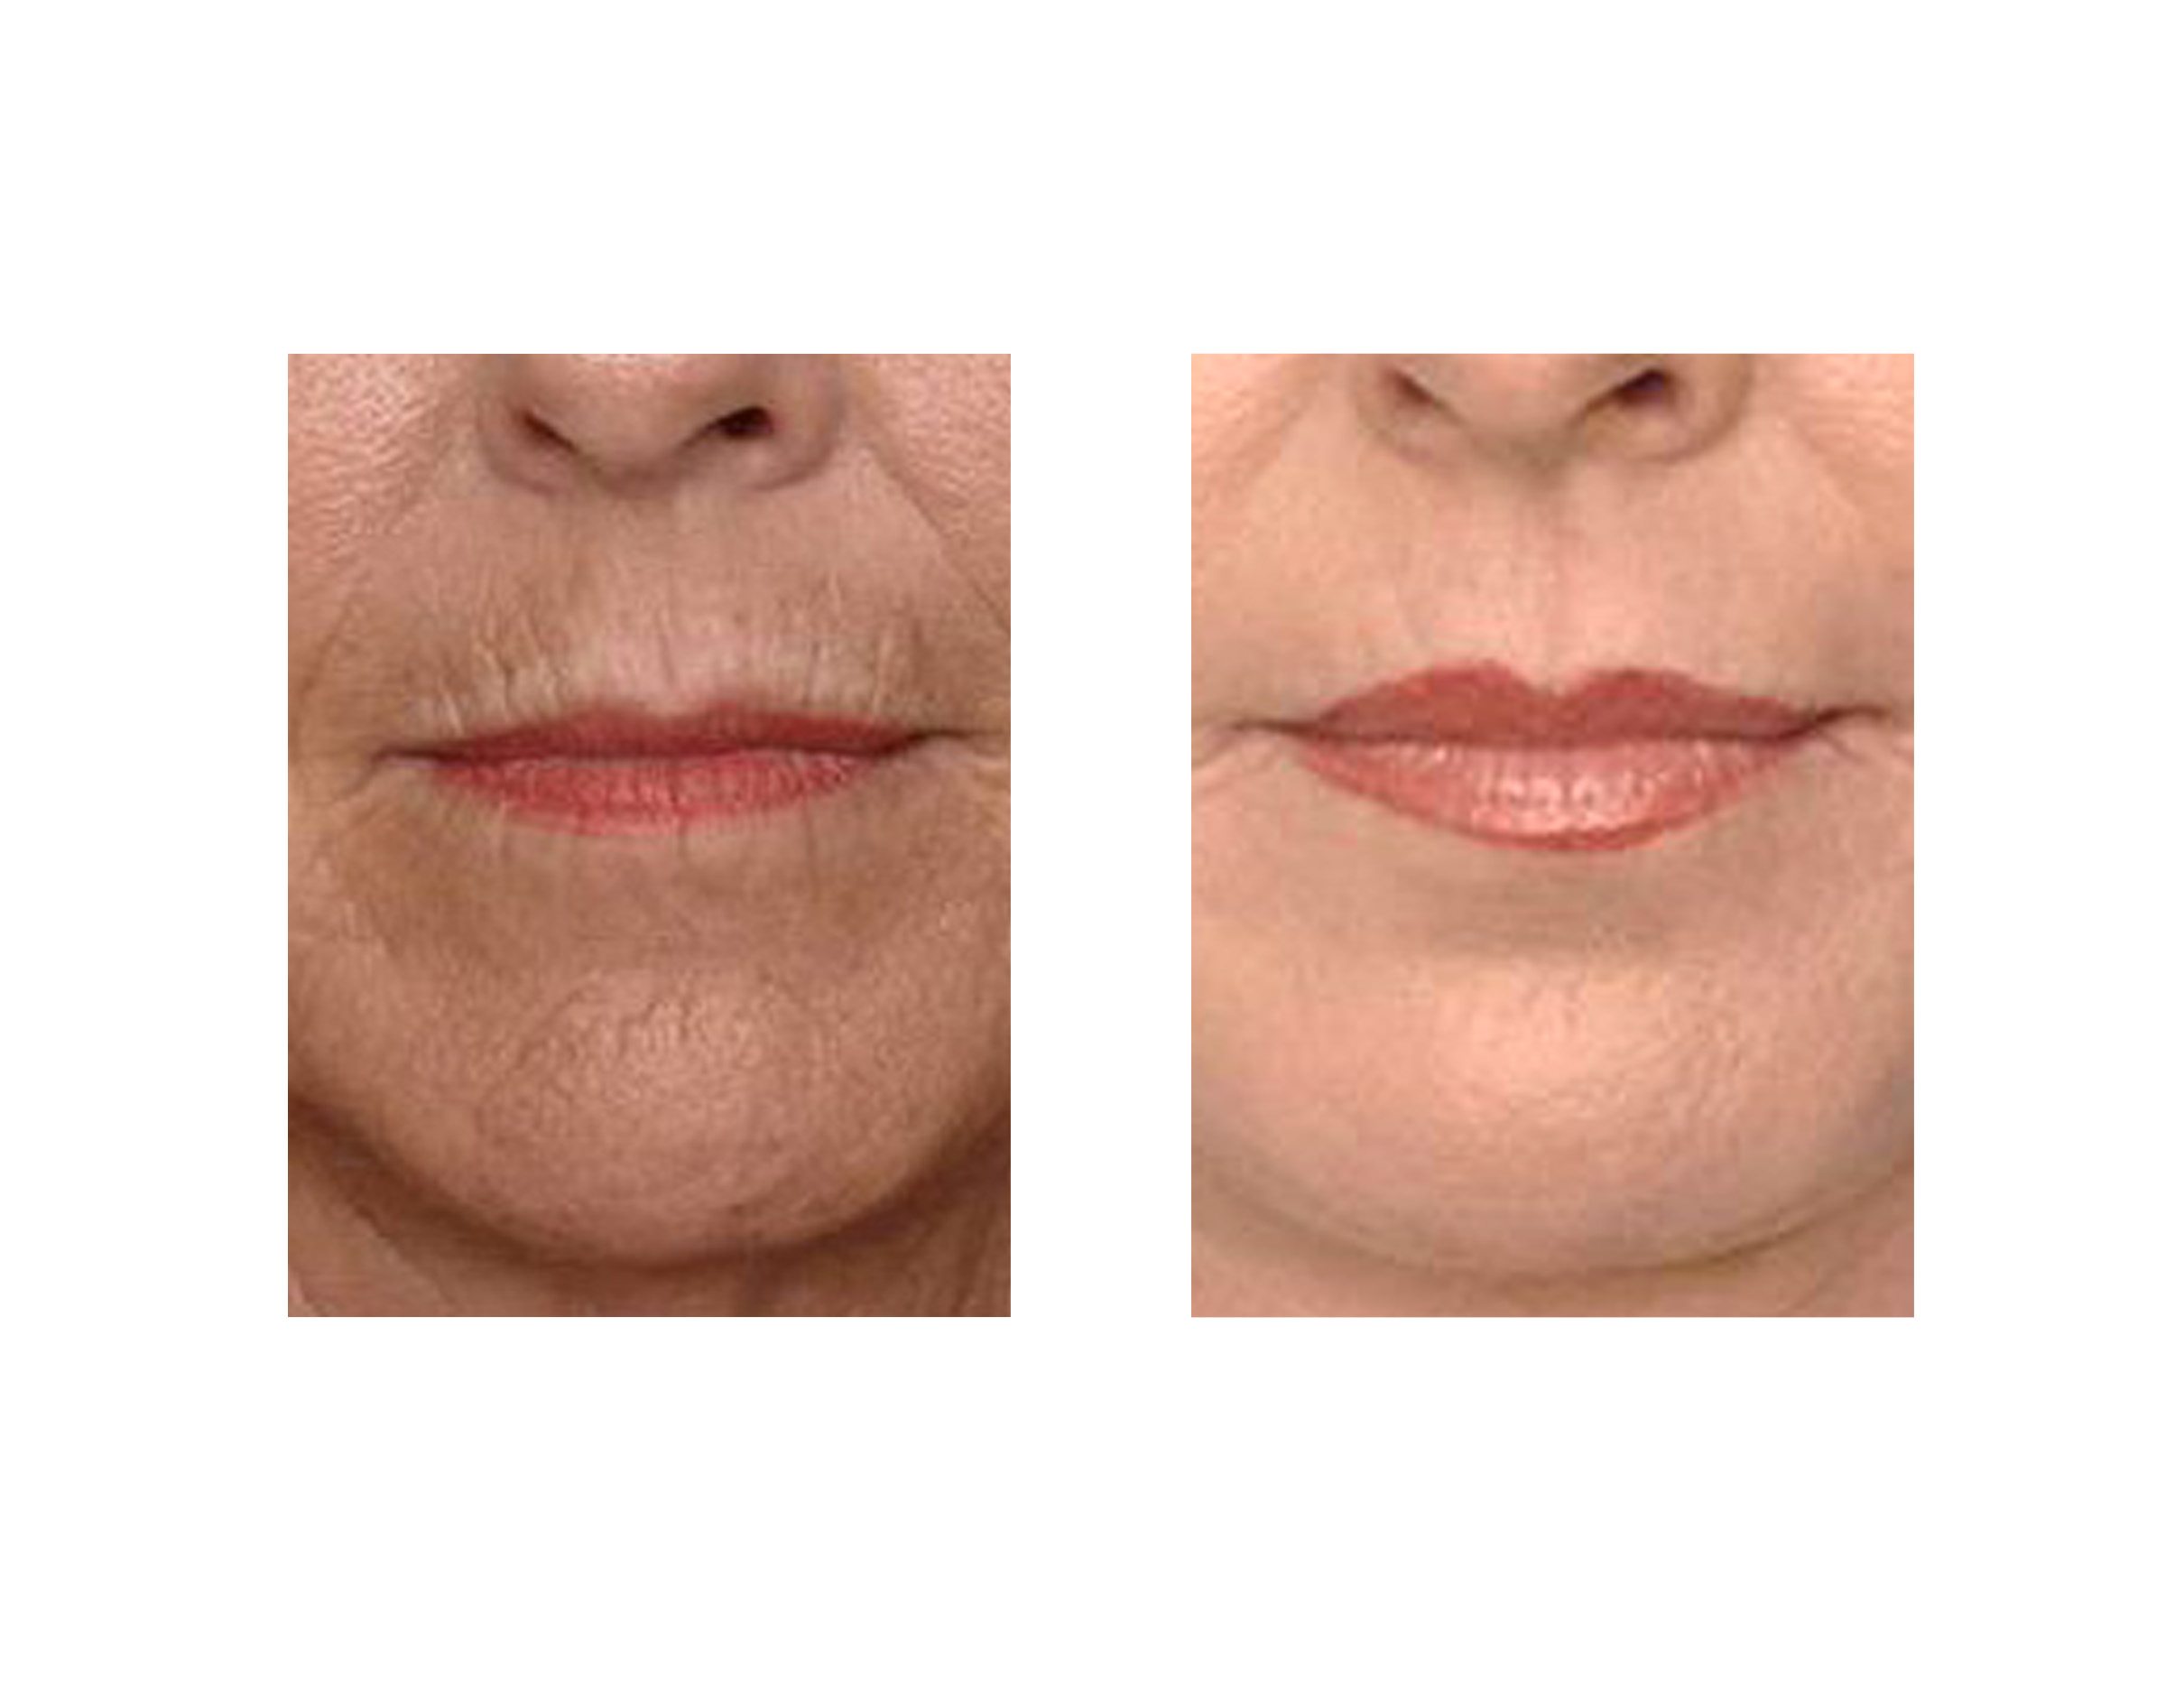 Upper Lip and Chin Laser Resurfacing Dr Barry Eppley Indianapolis